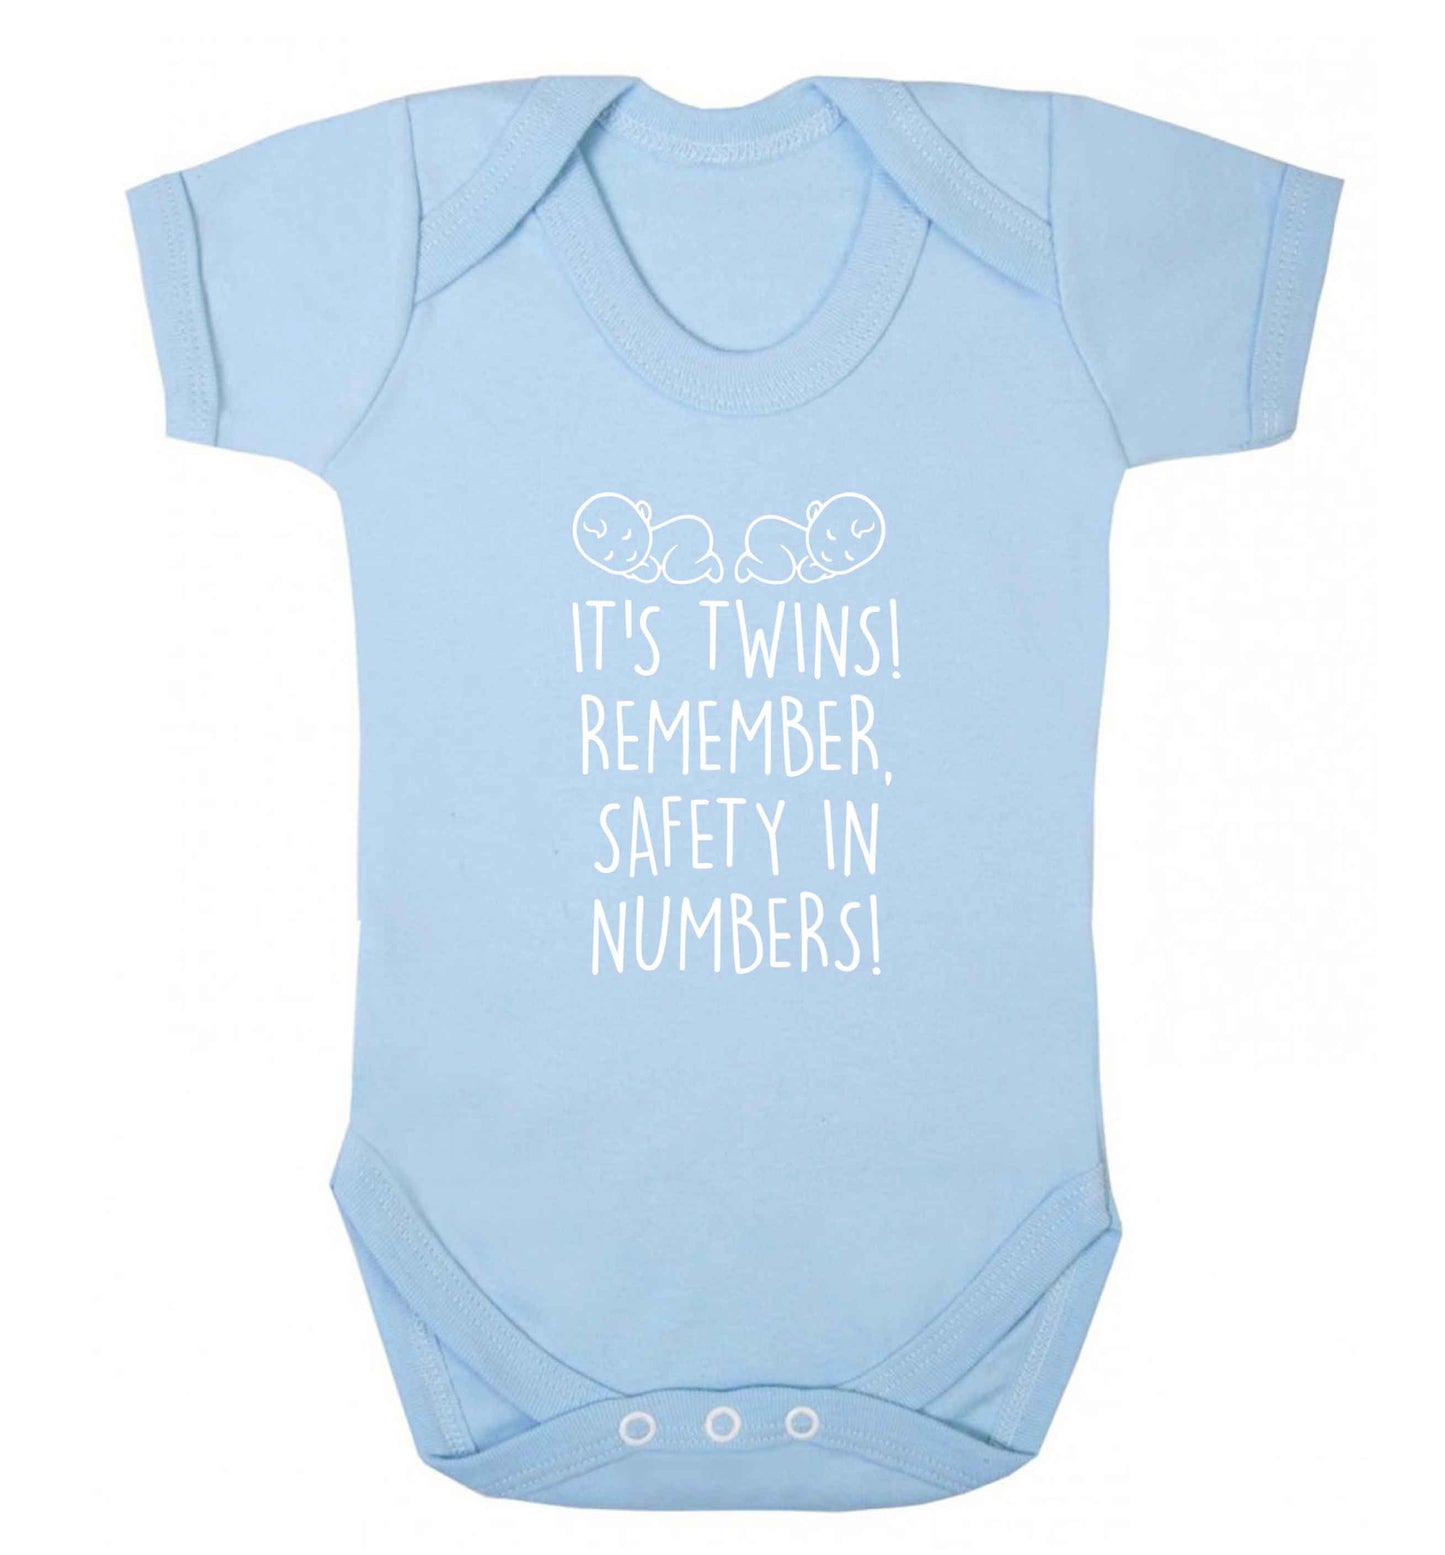 It's twins! Remember safety in numbers! baby vest pale blue 18-24 months